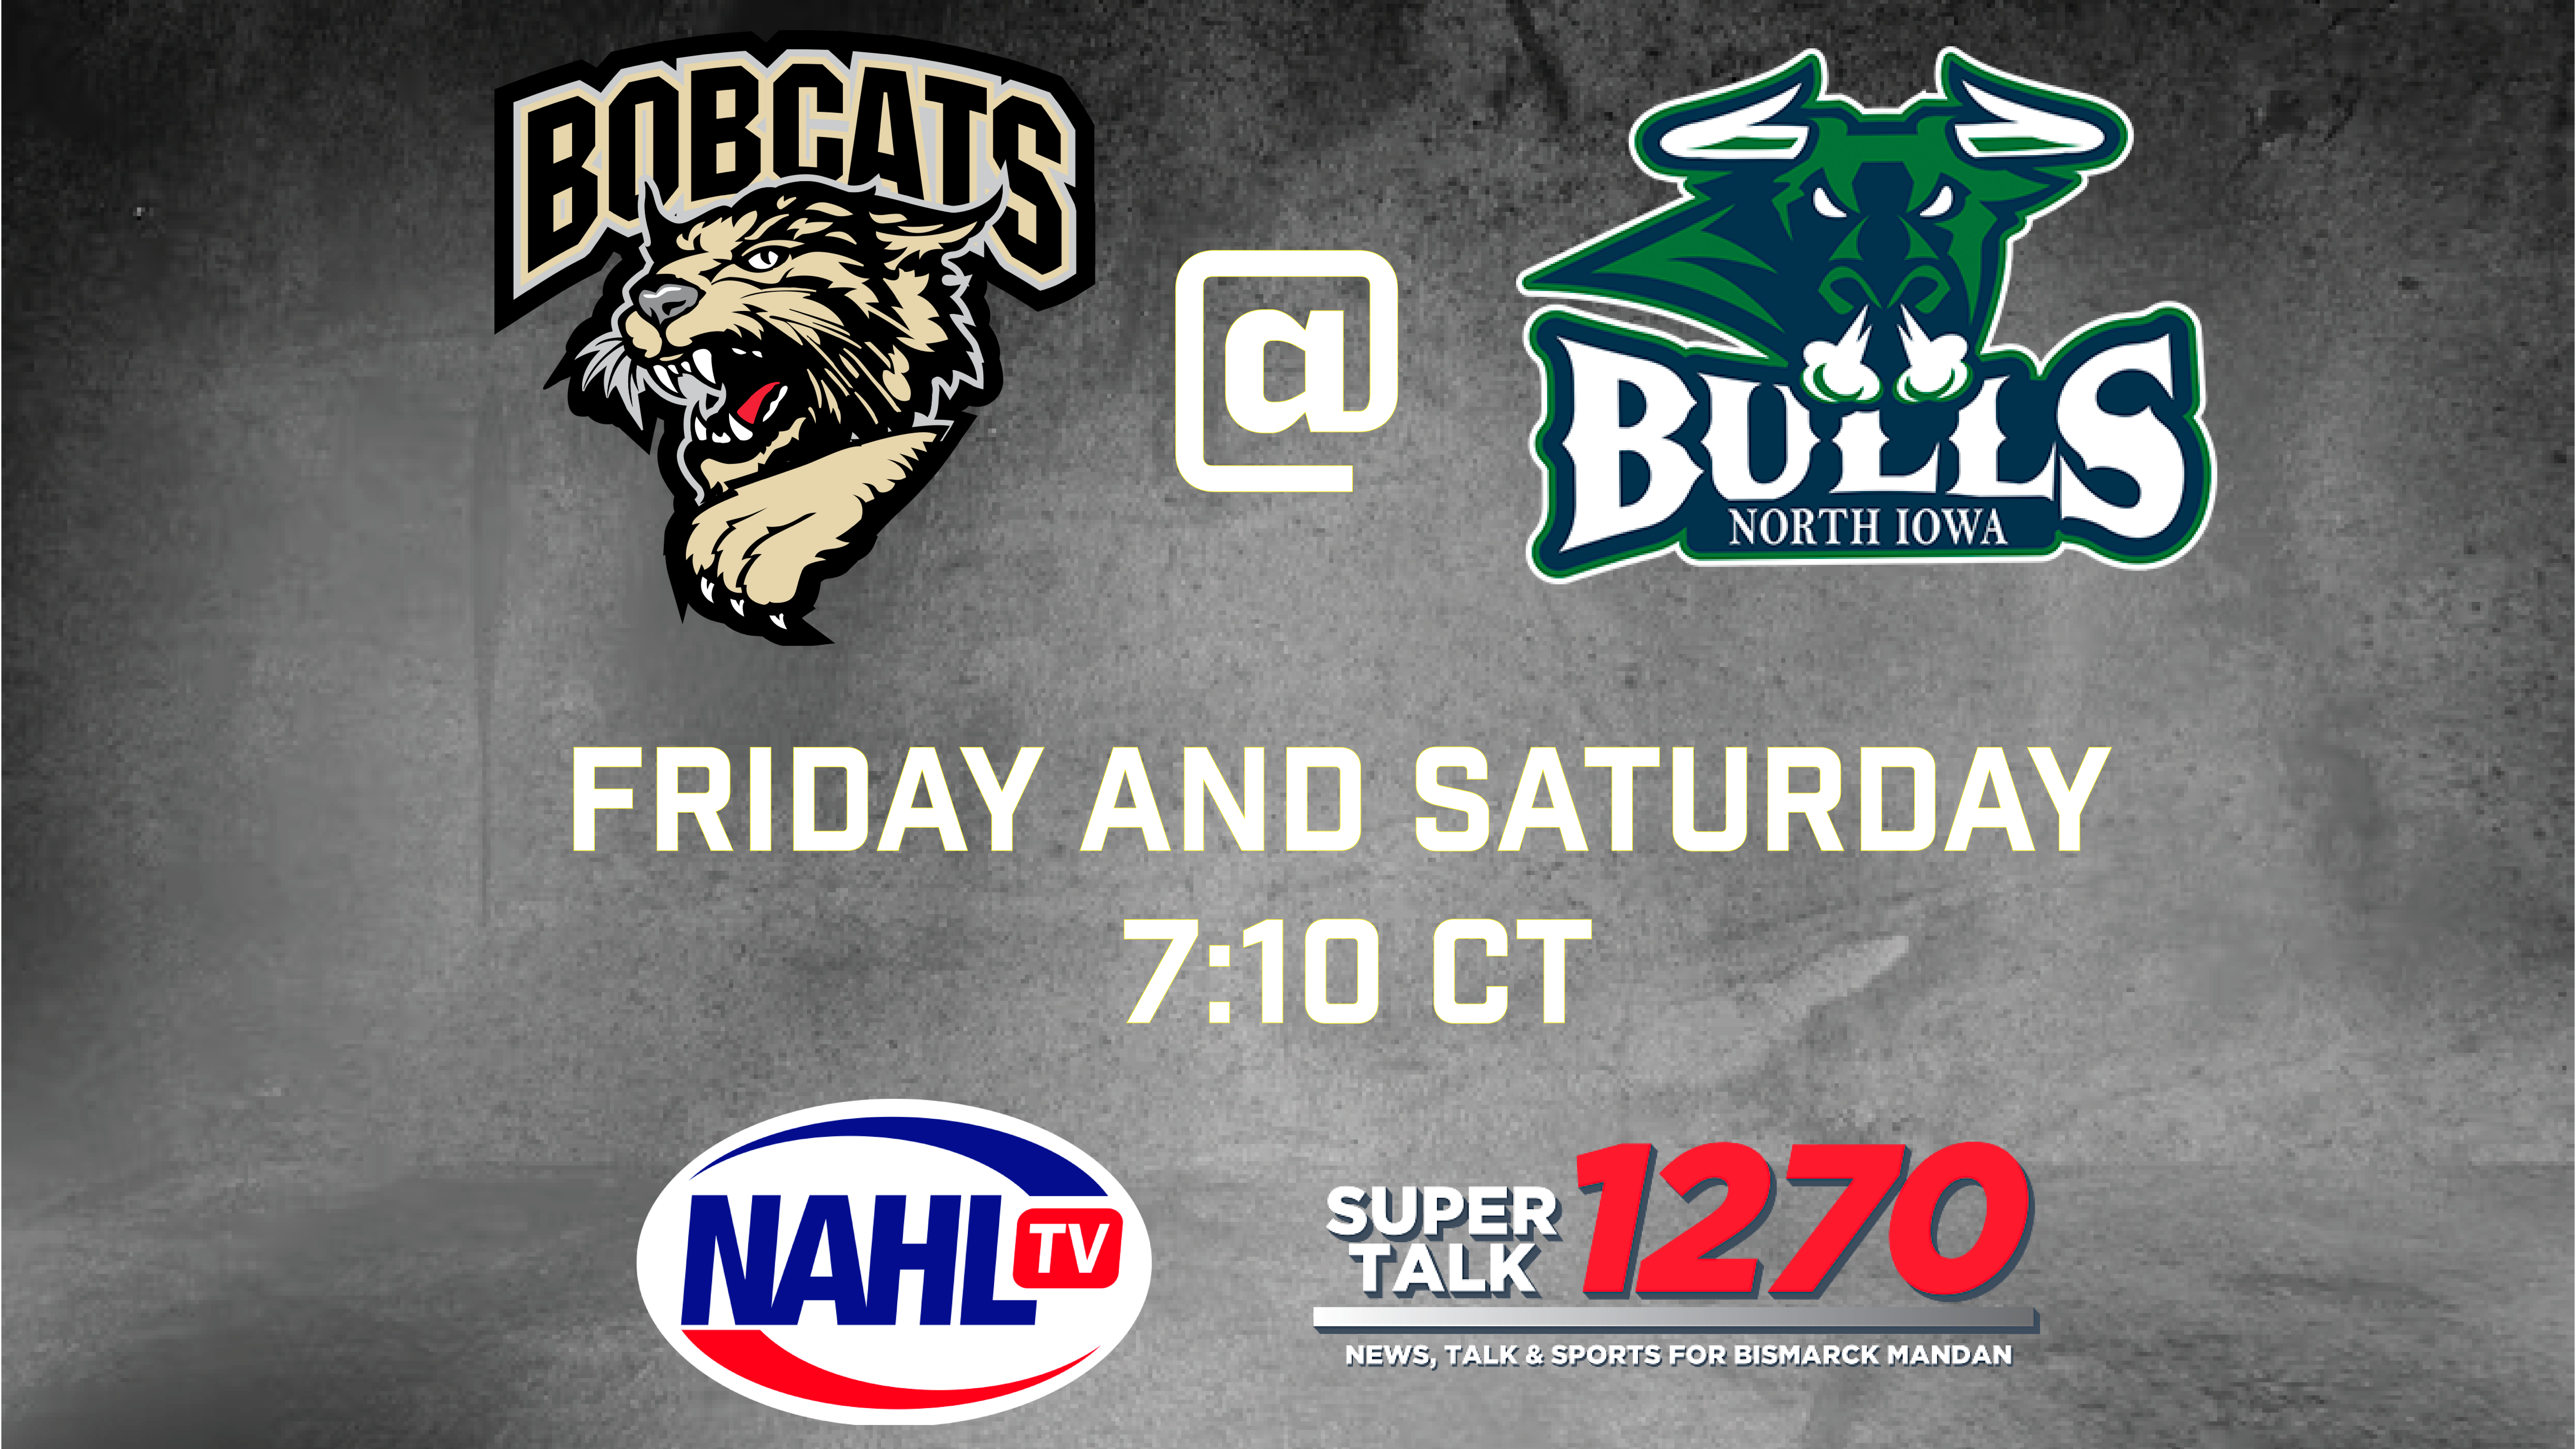 Bobcats head to North Iowa for two-game set